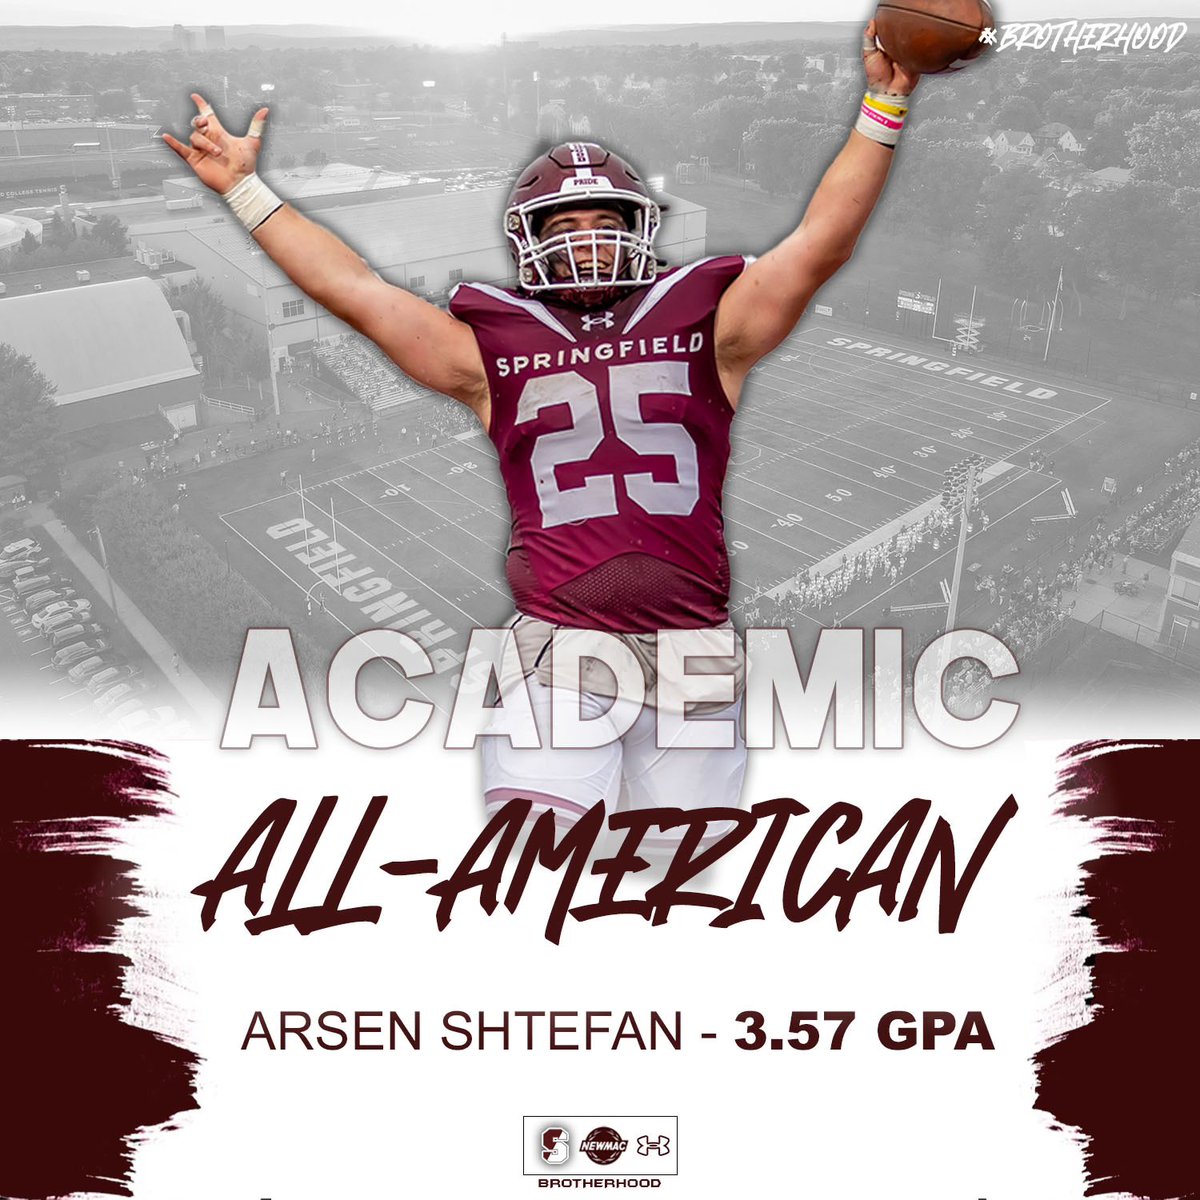 Congratulations to Senior Fullback Arsen Shtefan on being named a CSC Academic All-American‼️ A well EARNED honor for a guy who consistently gets it done on and off the field‼️🔻 #BTB #WHYSC 🔗 | tinyurl.com/2xcvpp8b